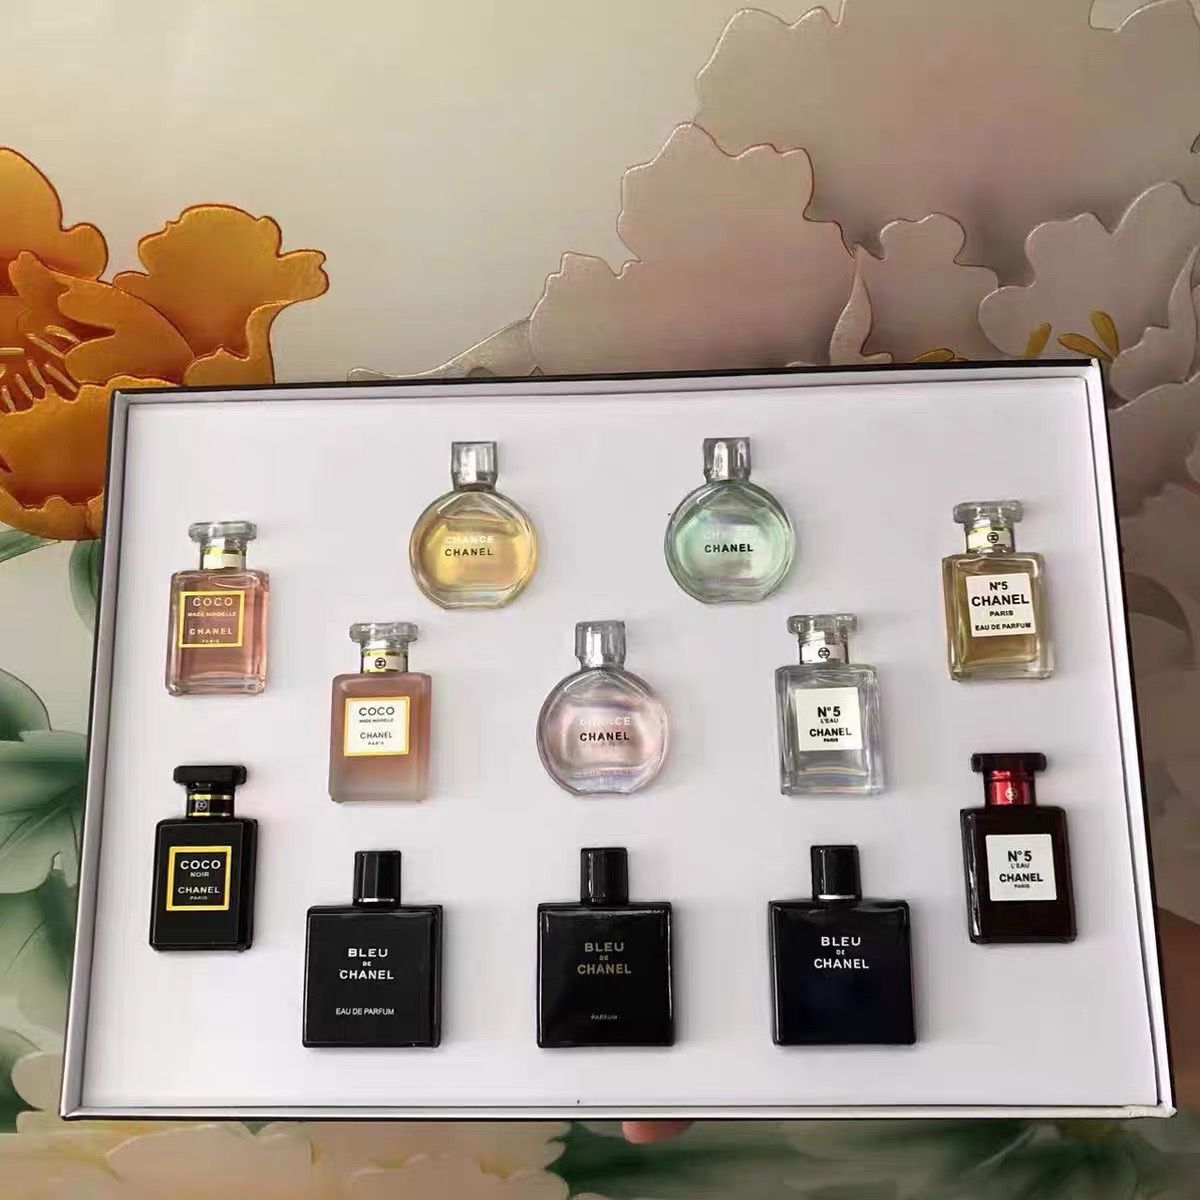 Chanel Chance Eau tendre (4) travel samples + double miroir for Sale in  Monsey, NY - OfferUp